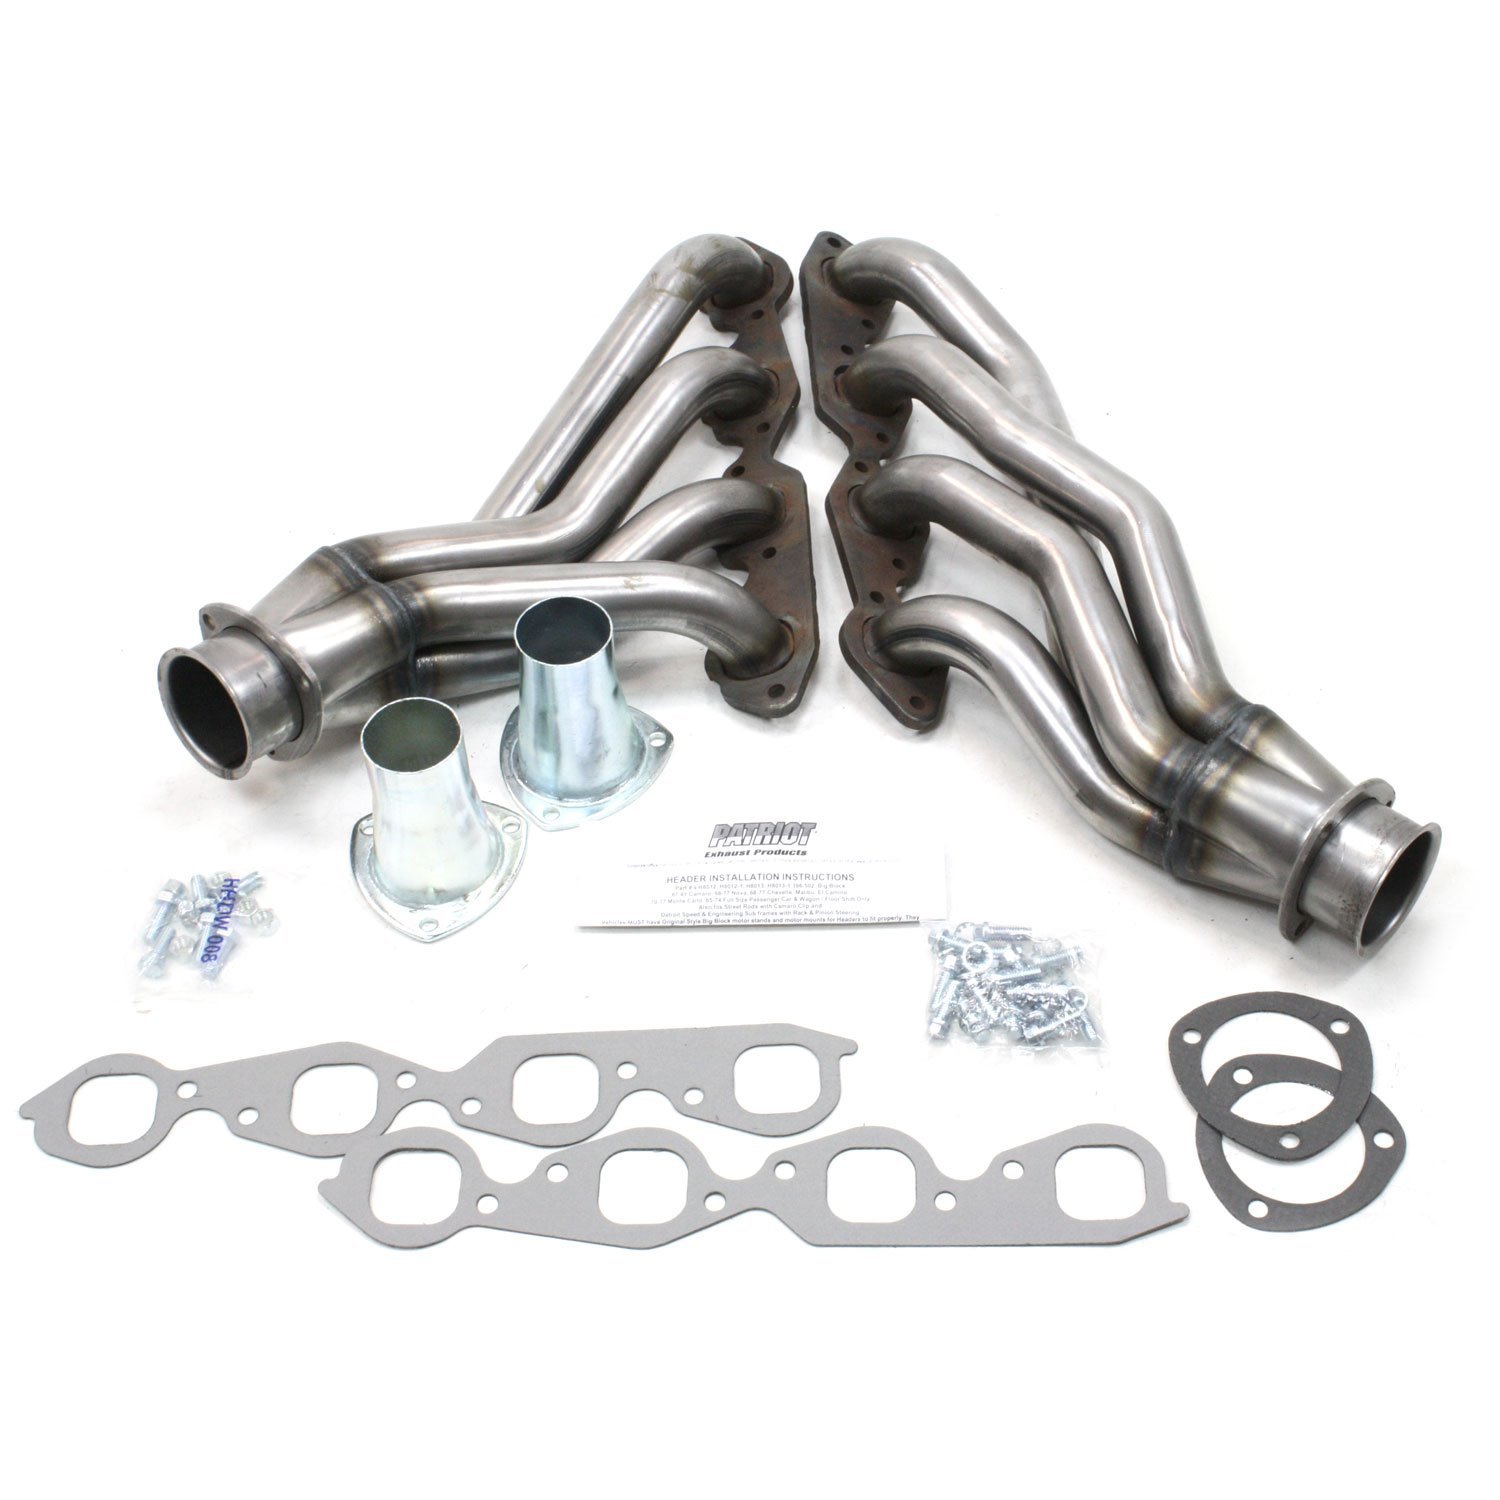 GM Specific Fit Headers 1965-1974 Full Size Passenger